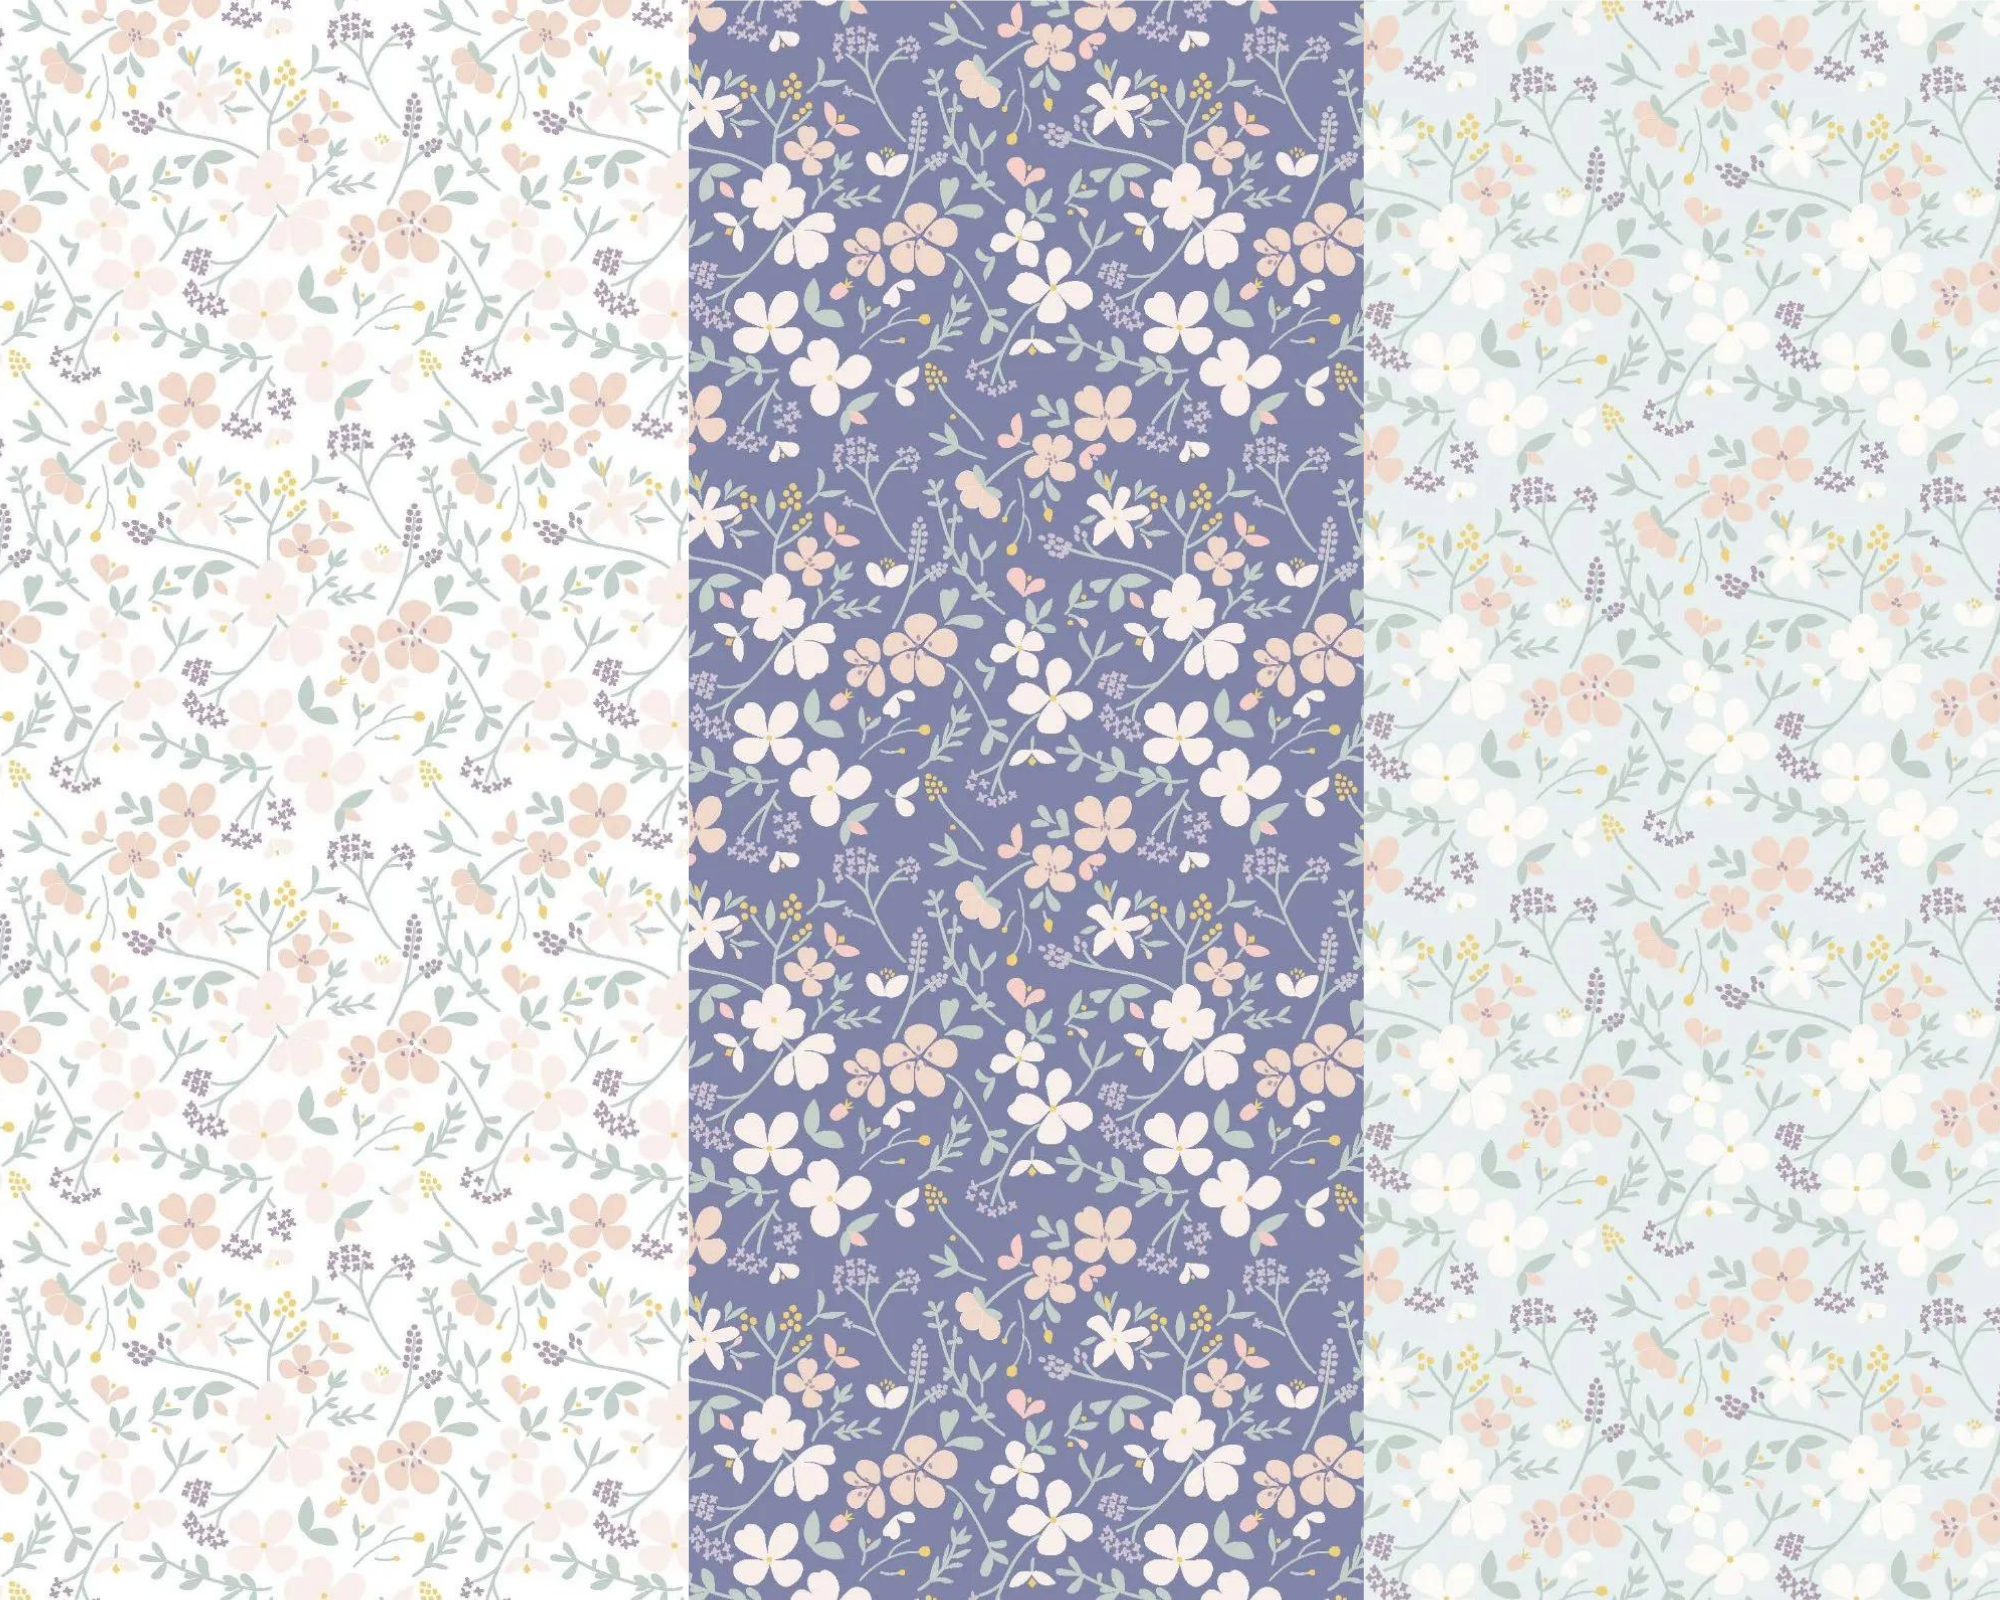 Pastel Flowers on duck egg blue cotton fabric - Lewis & Irene